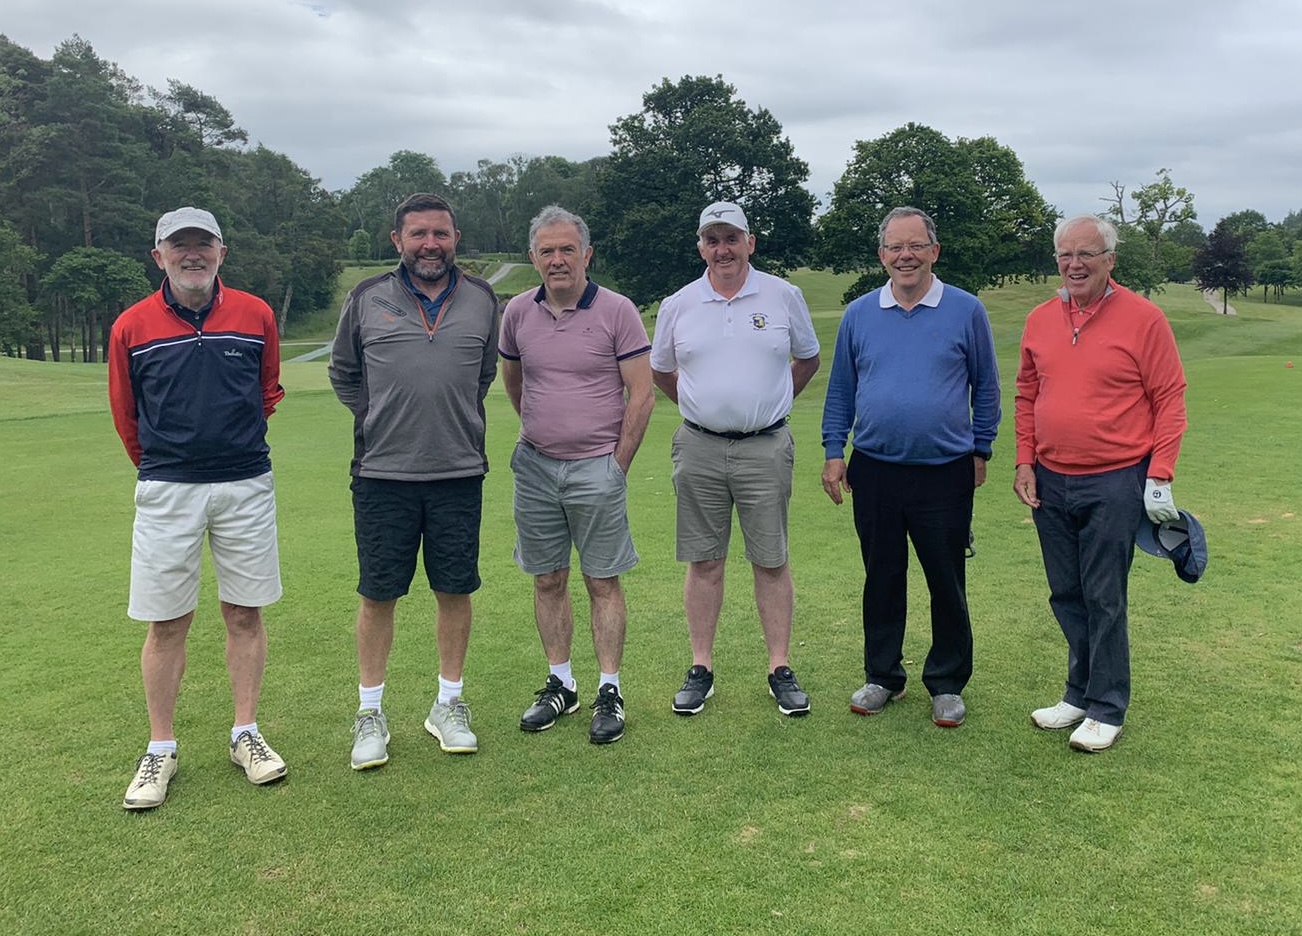 Cormac Mehigan (4th from right) with Team Ireland Parkinson’s team members Padraig Barry, Adrian Grey, Kevin Fitzsimons, Gerard Loughnane, Billy Davis, Gerard O’Connor and James Quinlan Cormac Mehigan